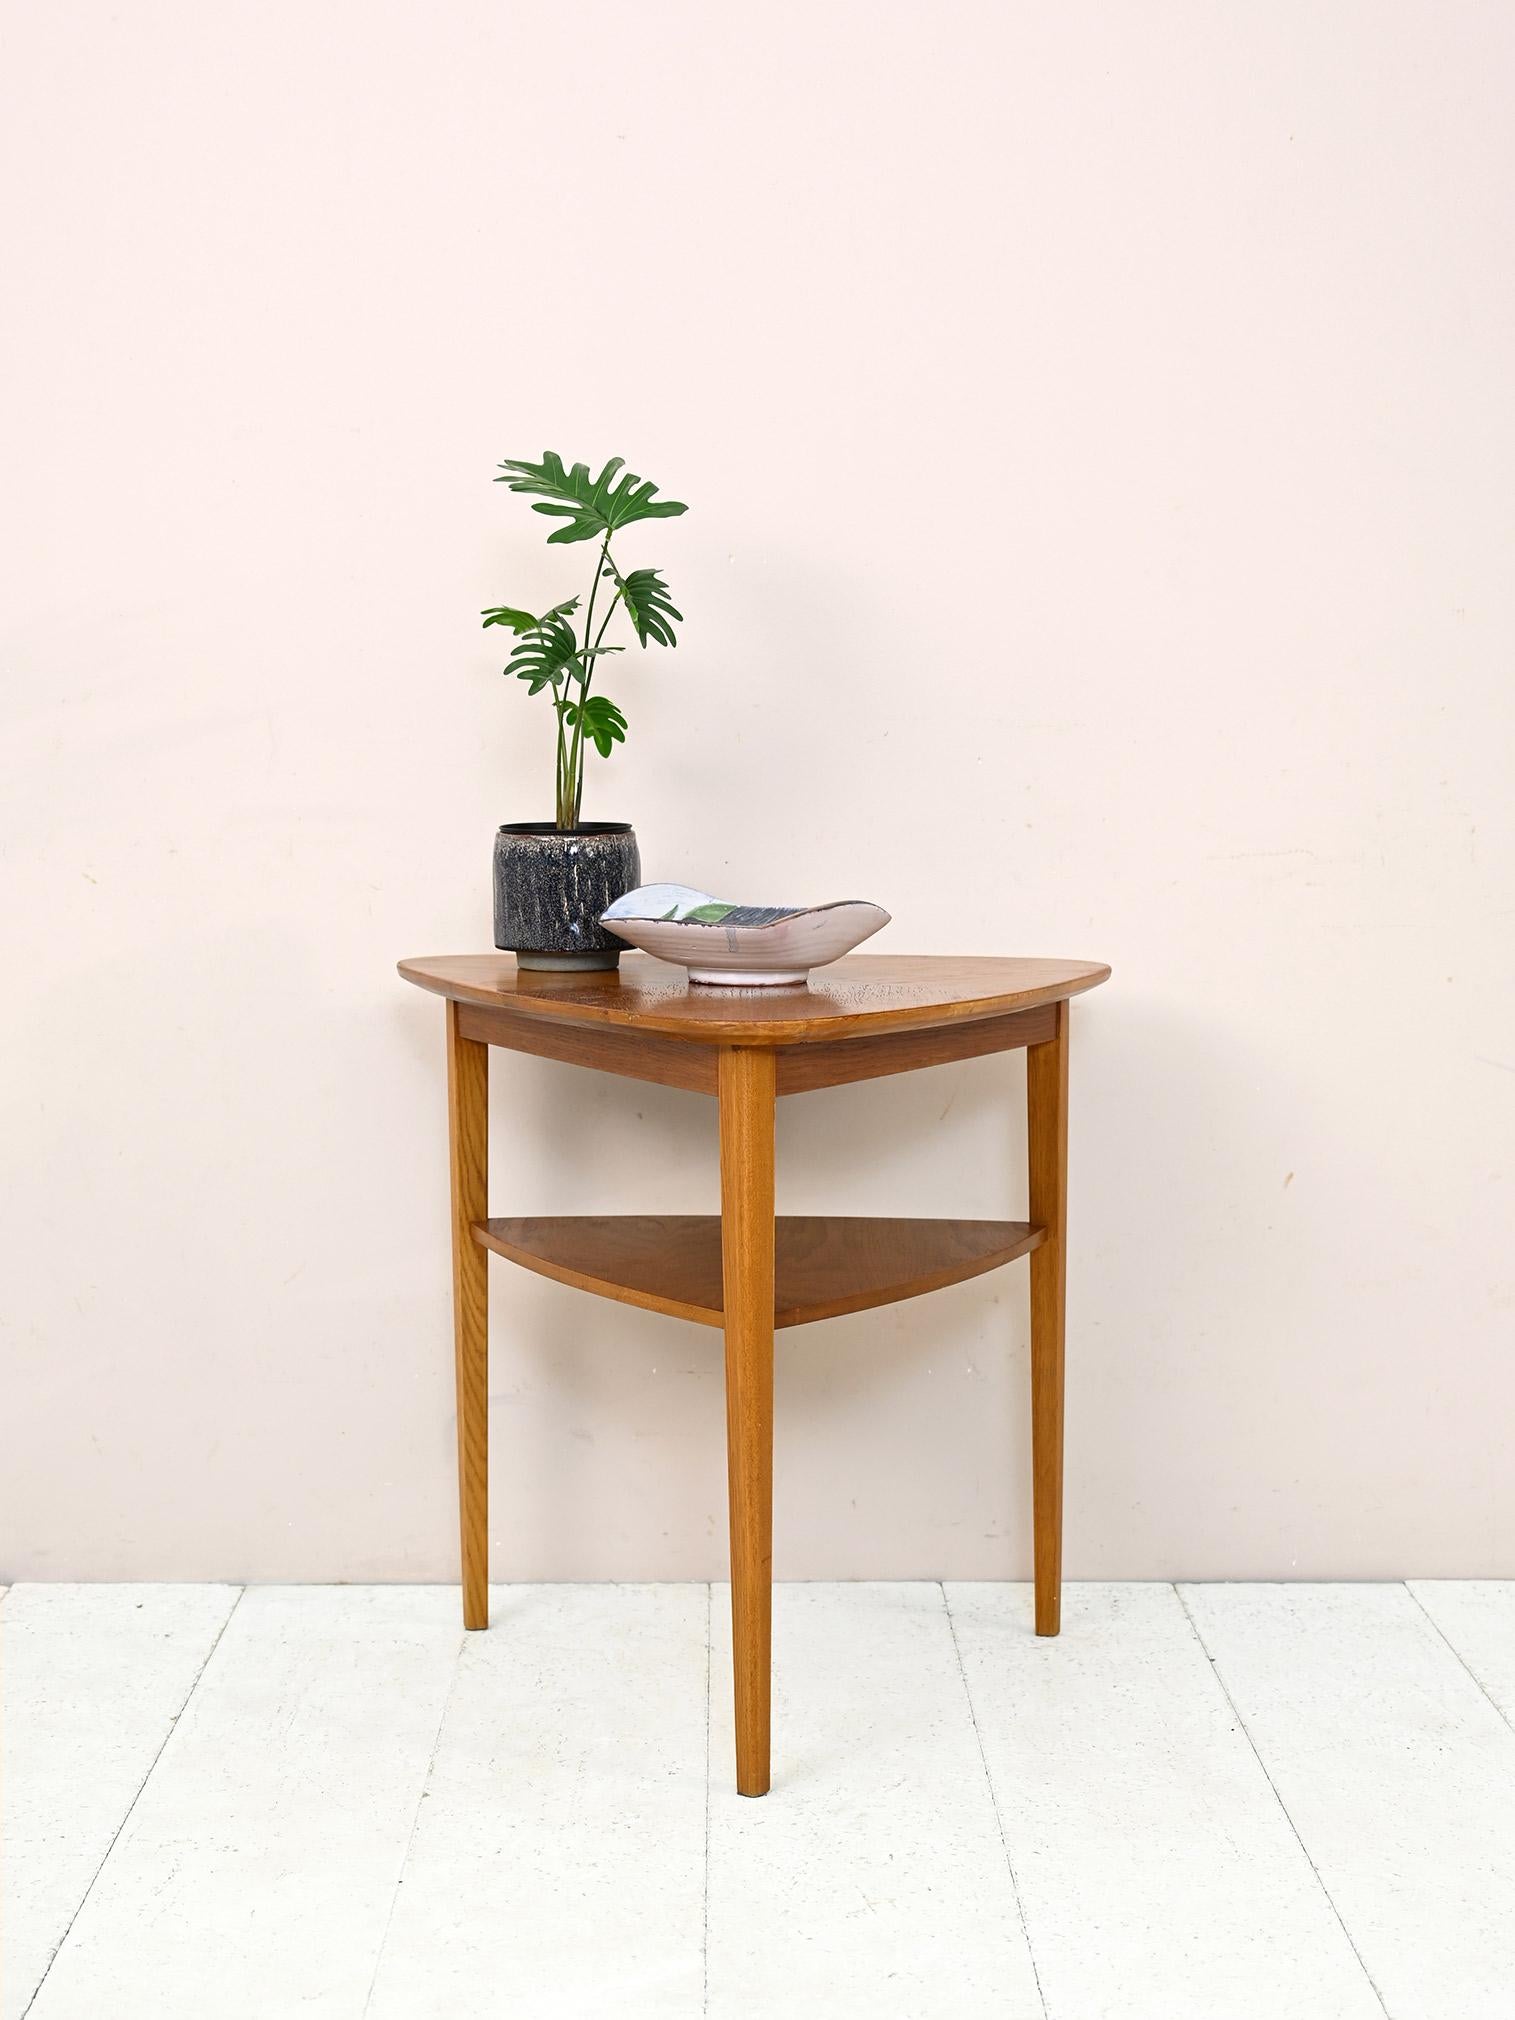 Scandinavian coffee table with double shelf.

This piece of furniture made distinctive by its triangular shape features a table top with rounded corners and long tapered legs.
The light color of the wood and minimal lines make it a modern object